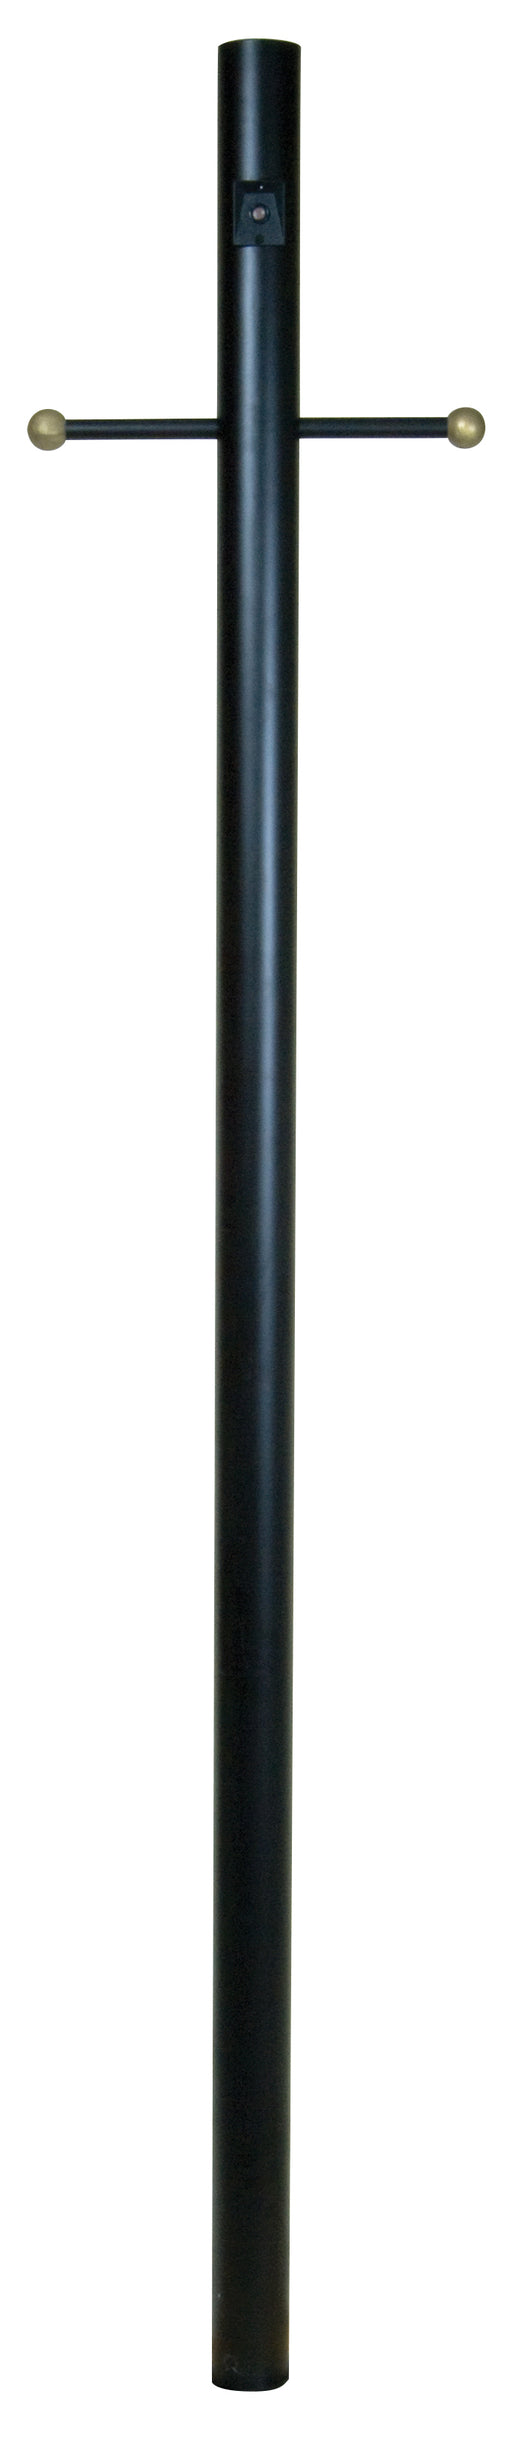 Craftmade 84" Smooth Direct Burial Post w/ Photocell in Textured Black